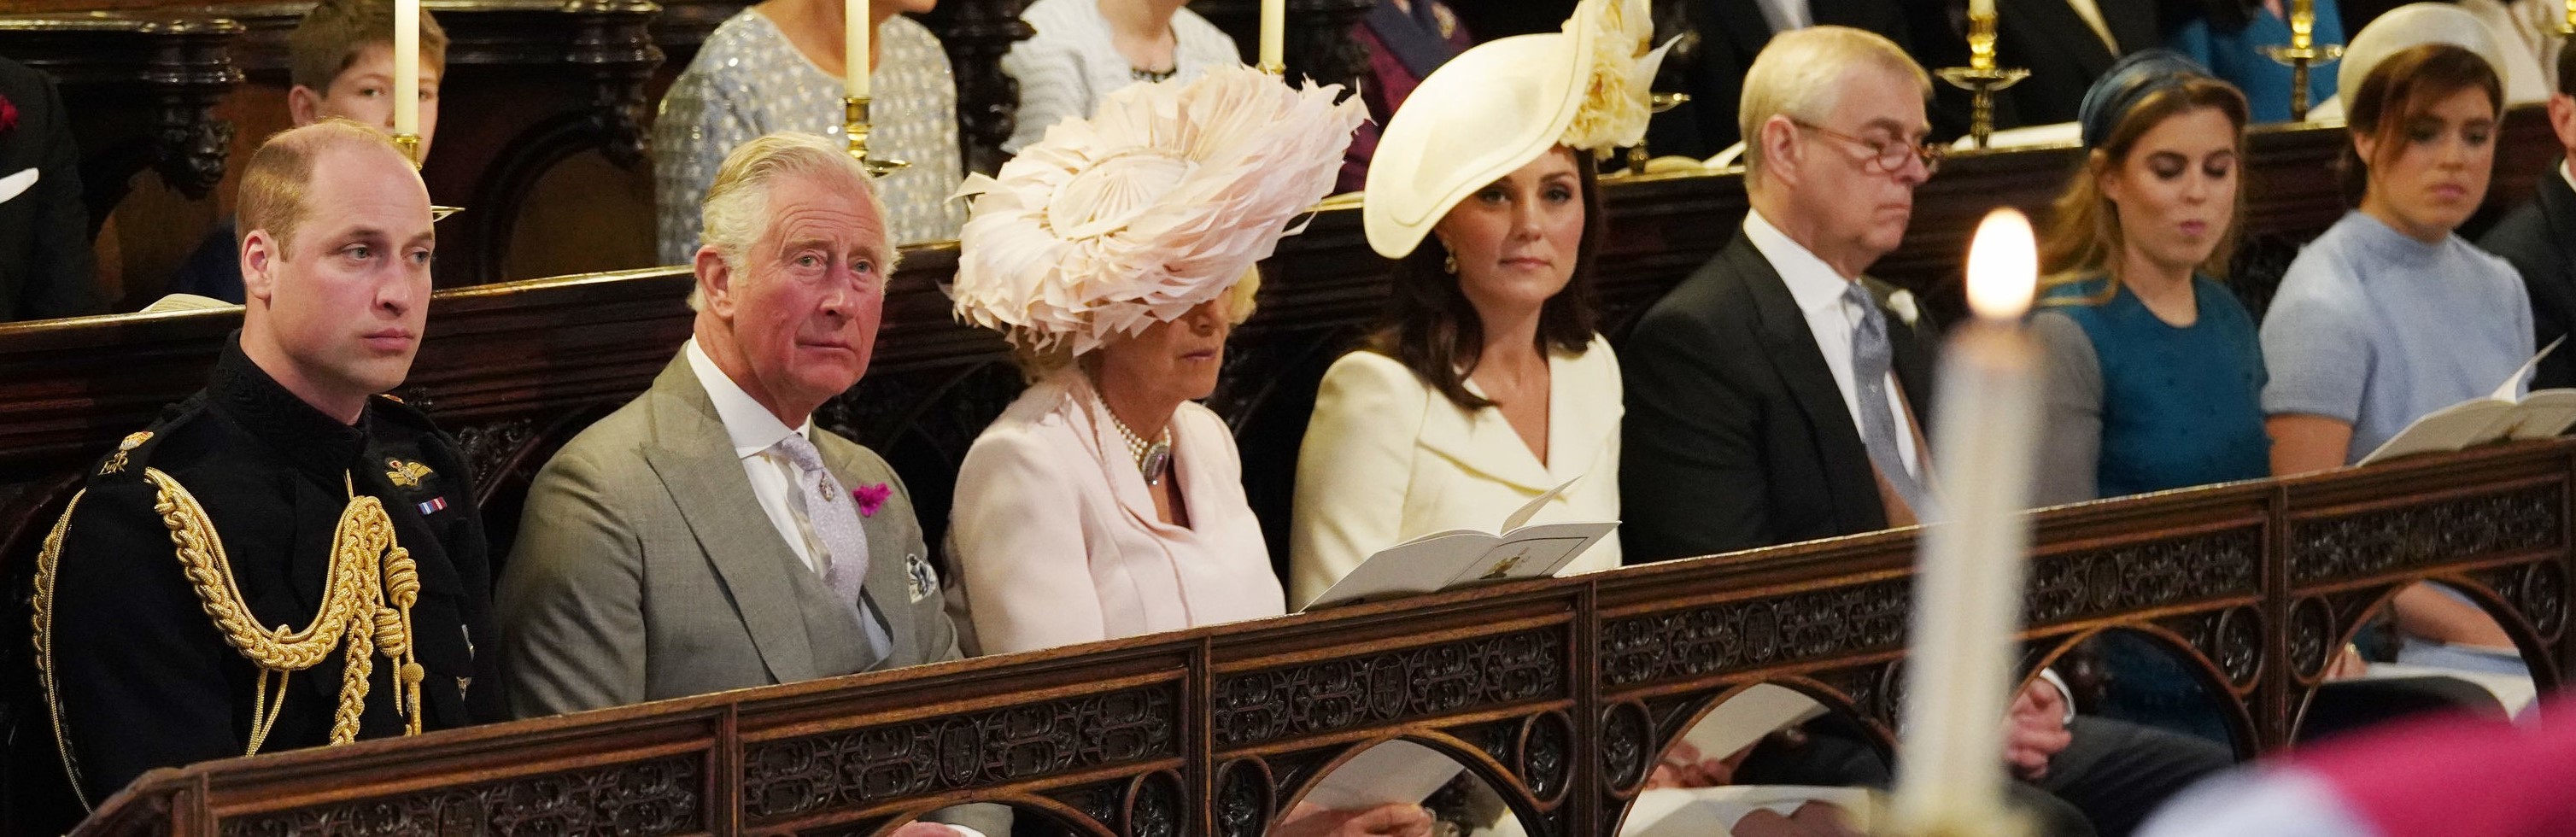 (L-R) Prince William, Prince Charles, Camilla Parker Bowles, Kate Middleton, Prince Andrew, Princess Beatrice, and Princess Eugenie at Prince Harry and Meghan Markle's wedding